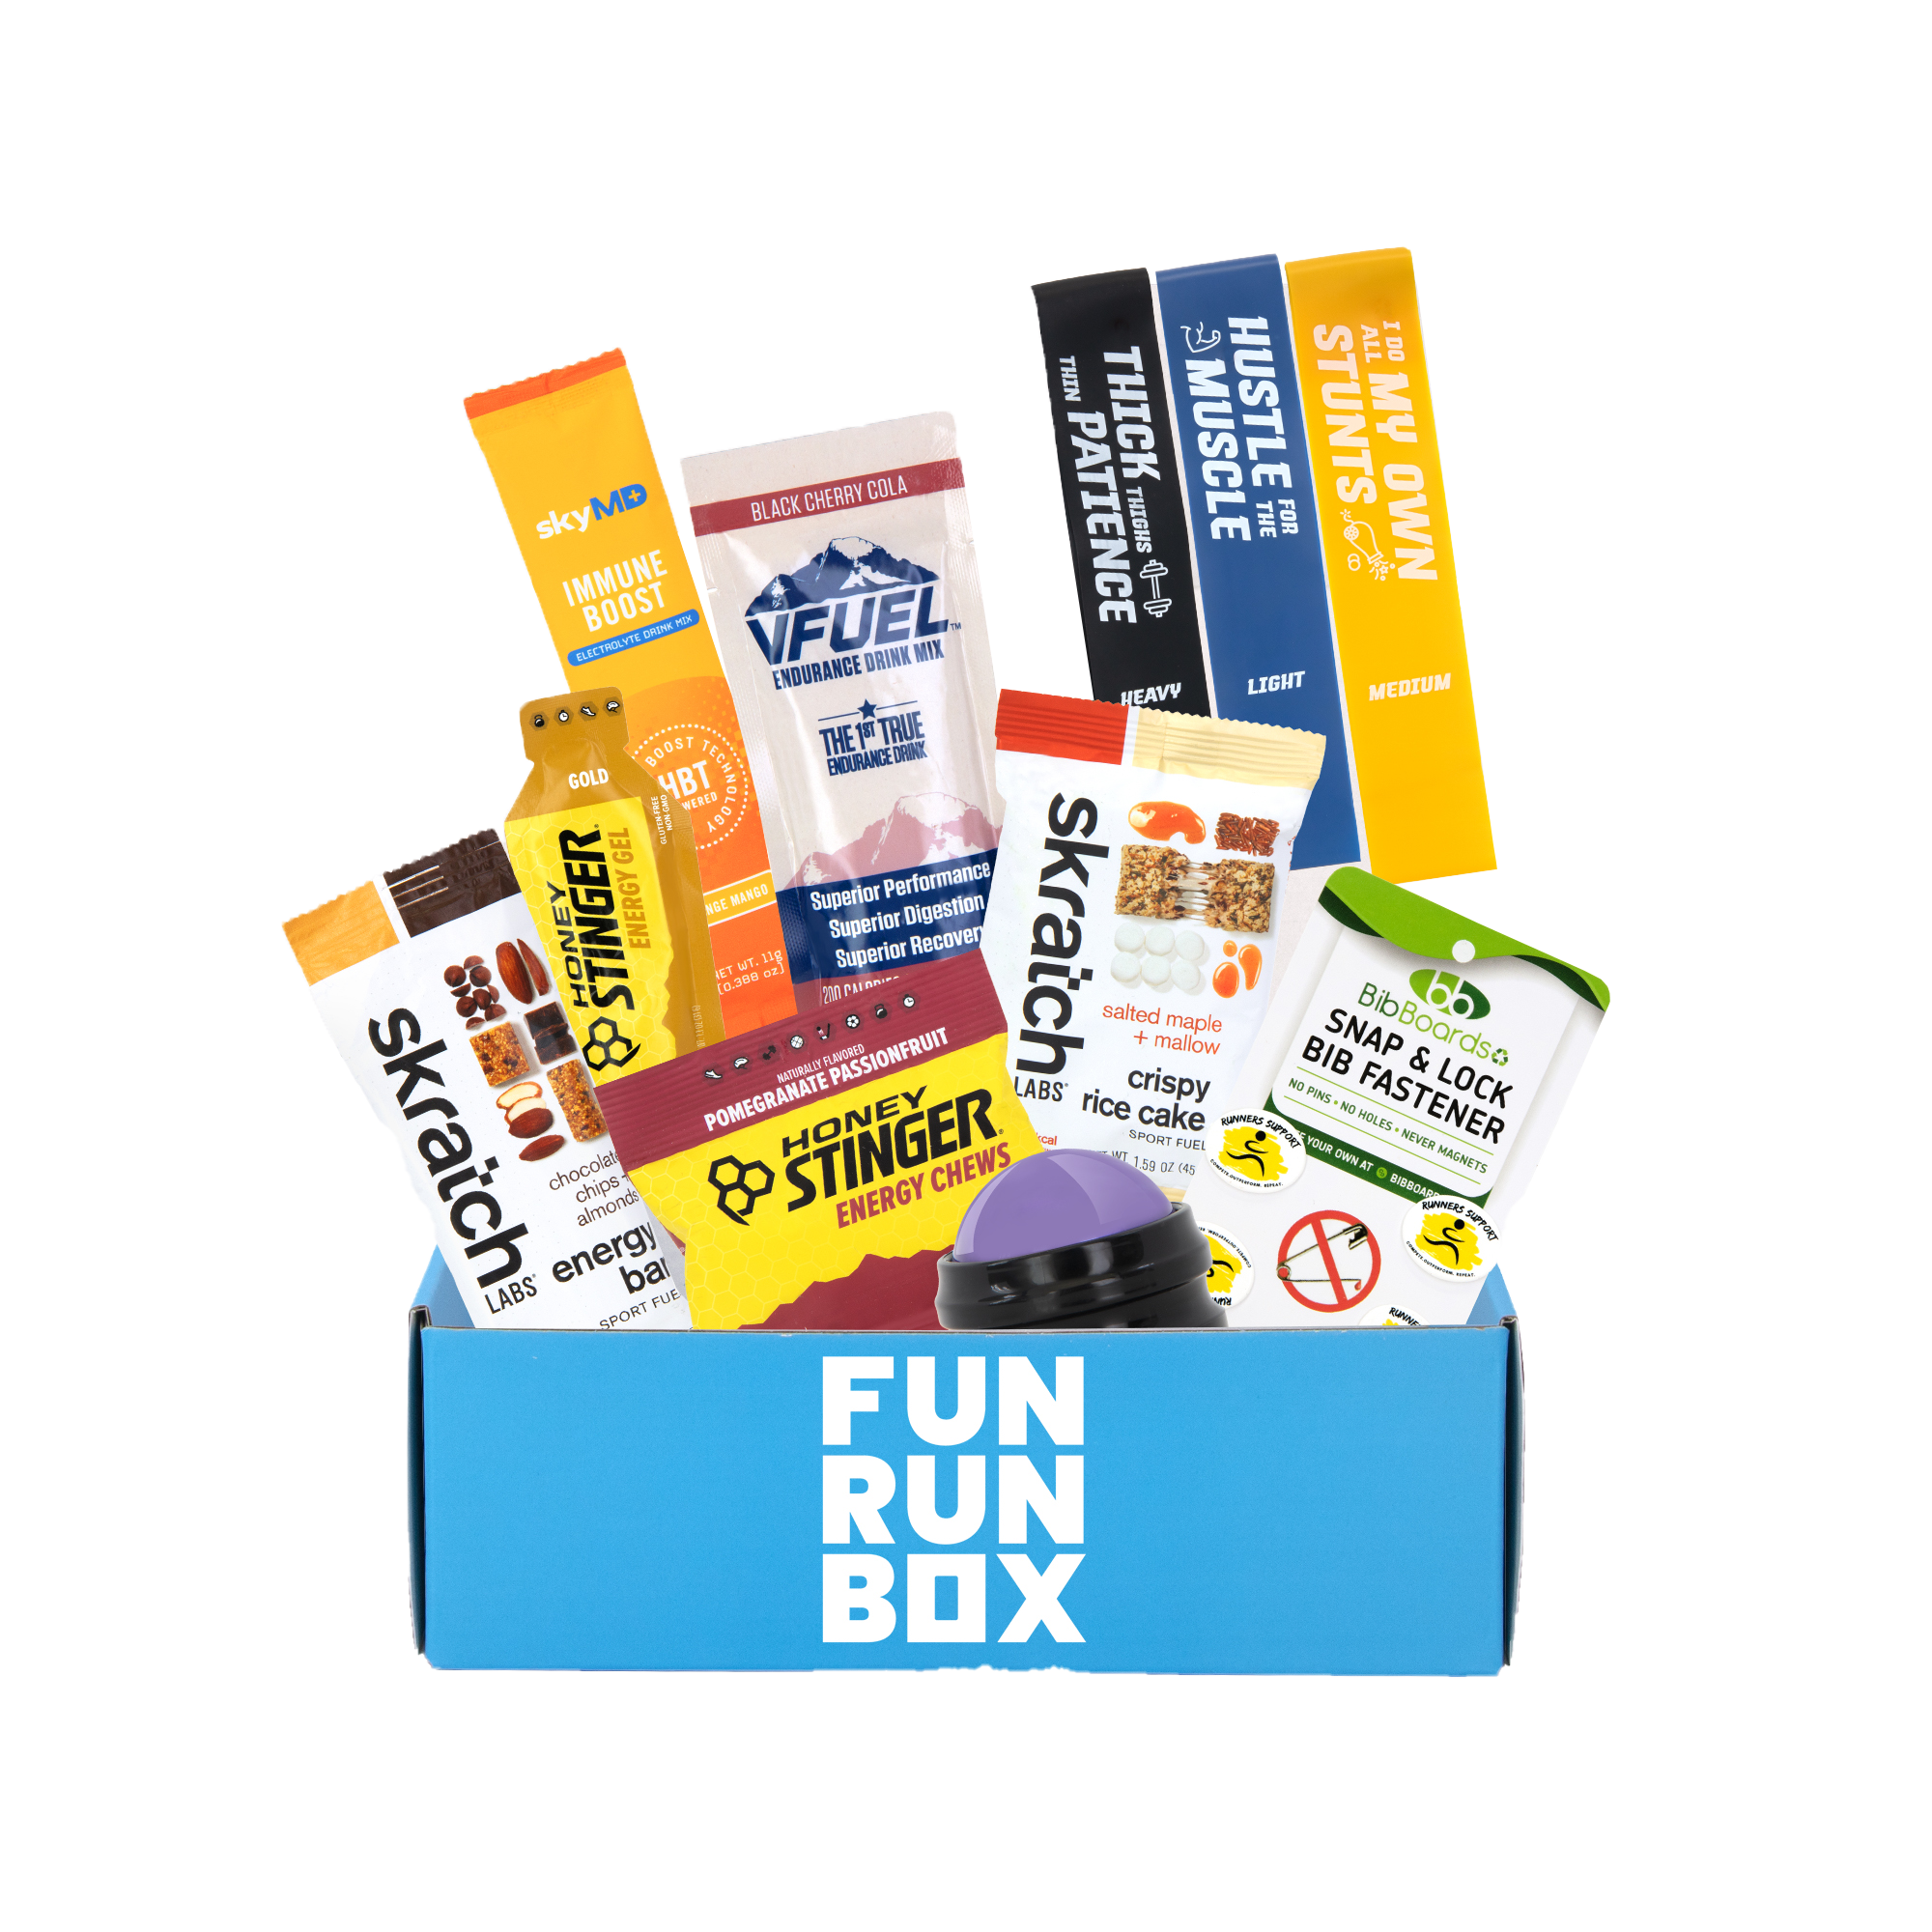 FRB Monthly Runners Box